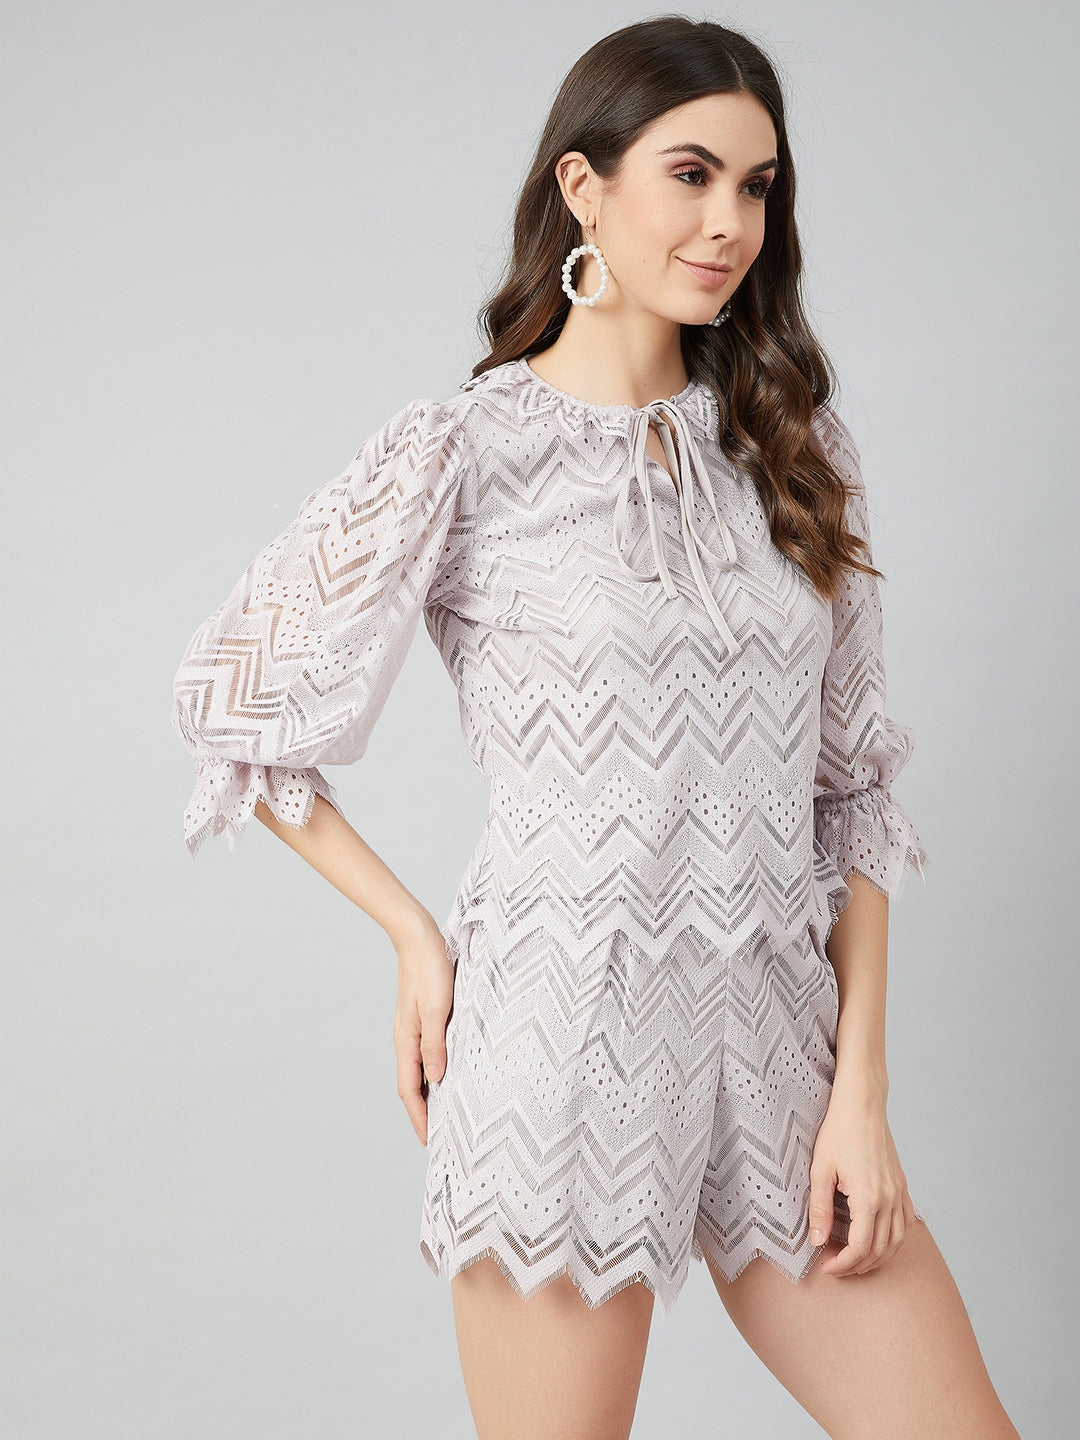 Athena Grey Tie-Up Neck Puff Sleeves Lace Regular Top - Athena Lifestyle